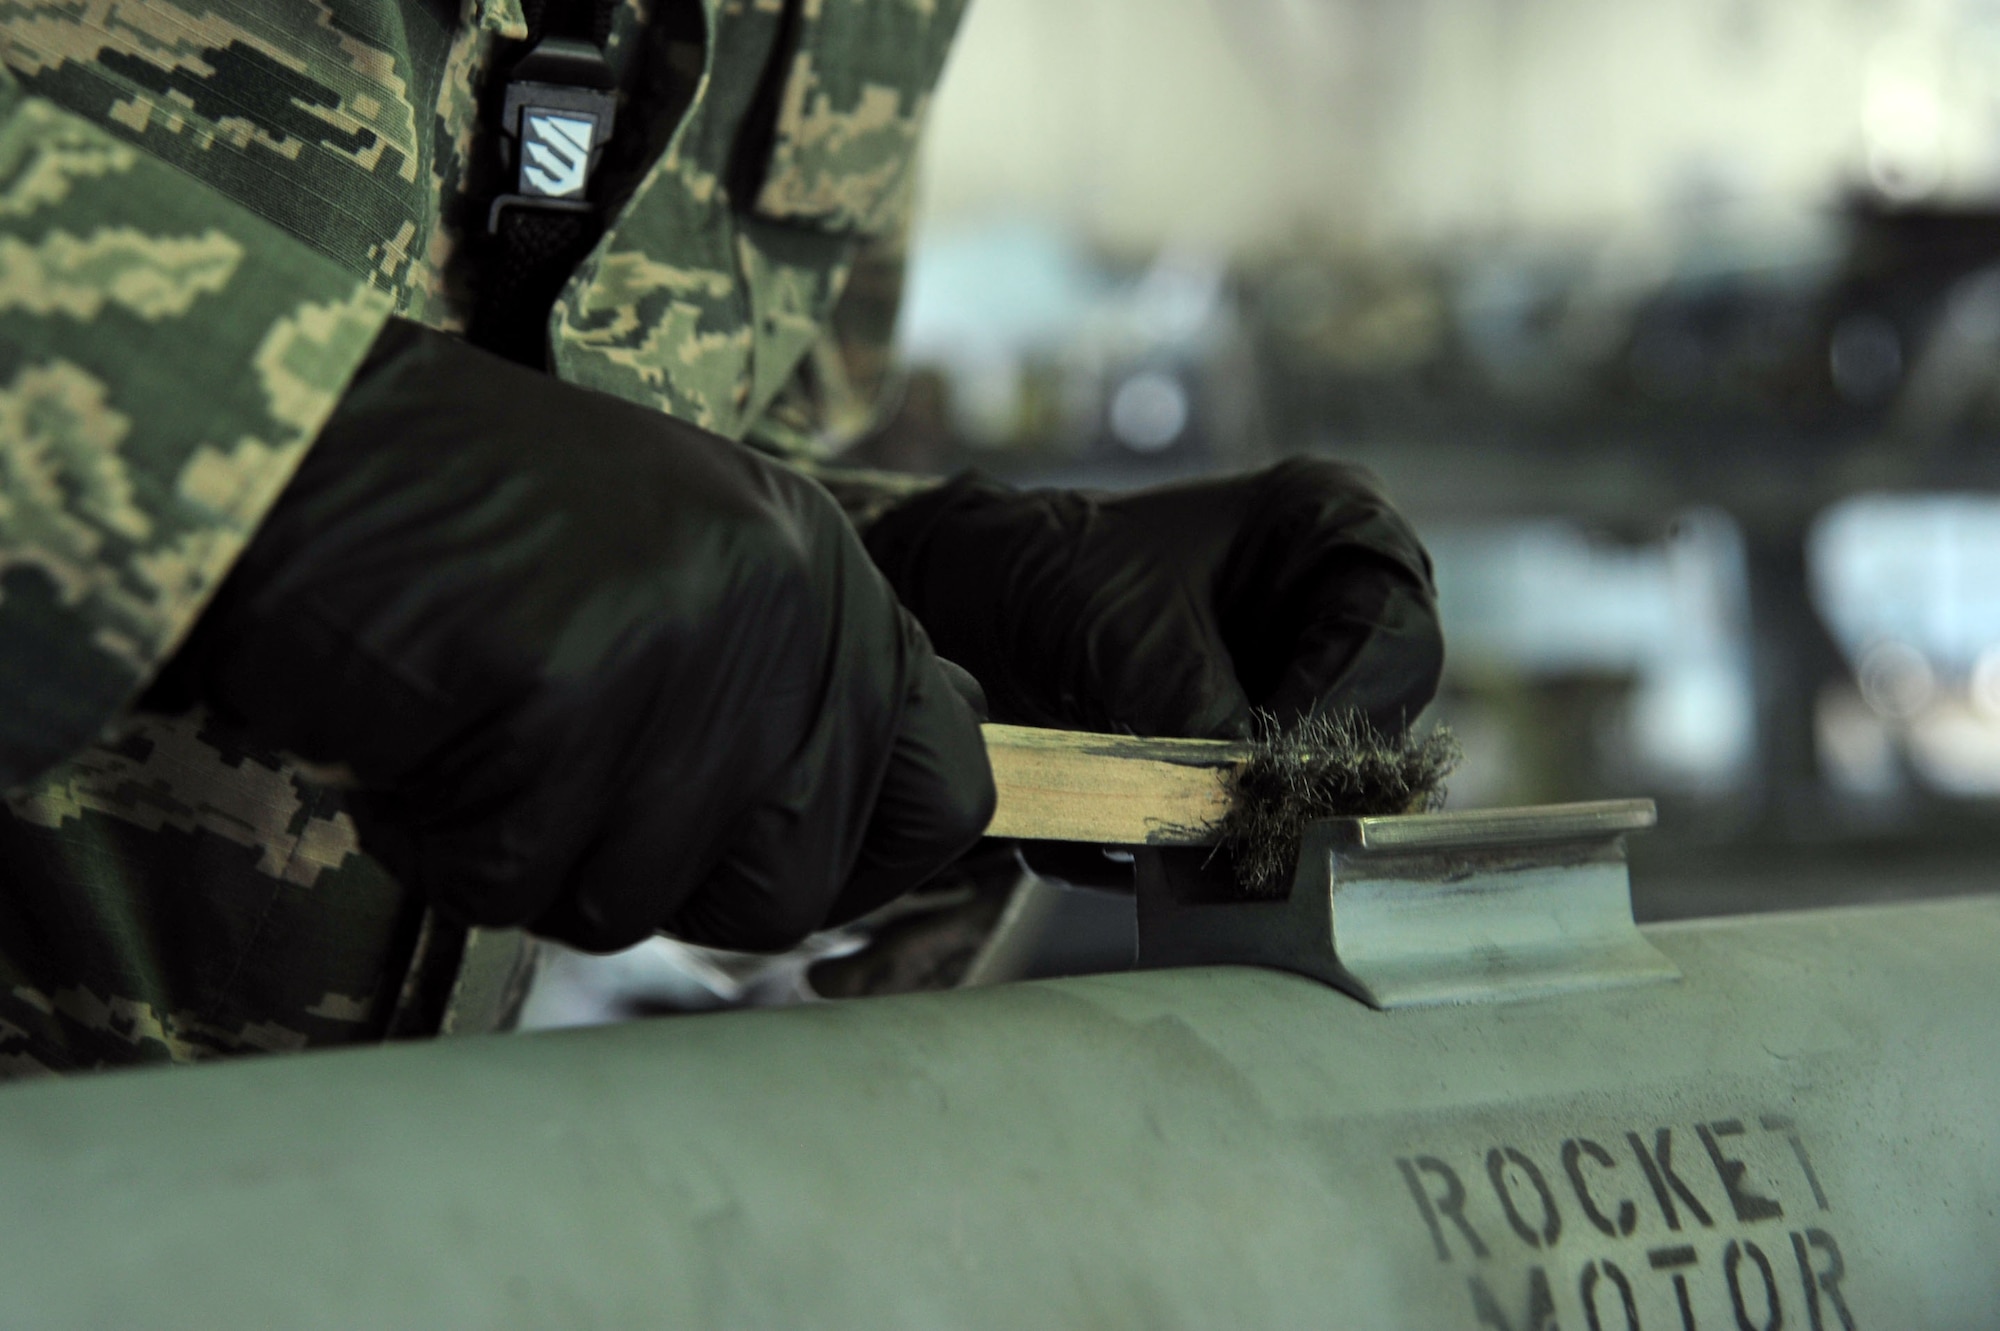 U.S. Air Force Airman 1st Class Ty Lerum, 20th Equipment Maintenance Squadron precision guided munitions technician, uses a wire brush to remove Solid Film on an AIM-9 Sidewinder missile hanger at Shaw Air Force Base, S.C., June 27, 2017. The lubricant film protects the hanger when the munition is attached to an aircraft. (U.S. Air Force photo by Airman 1st Class Kathryn R.C. Reaves)